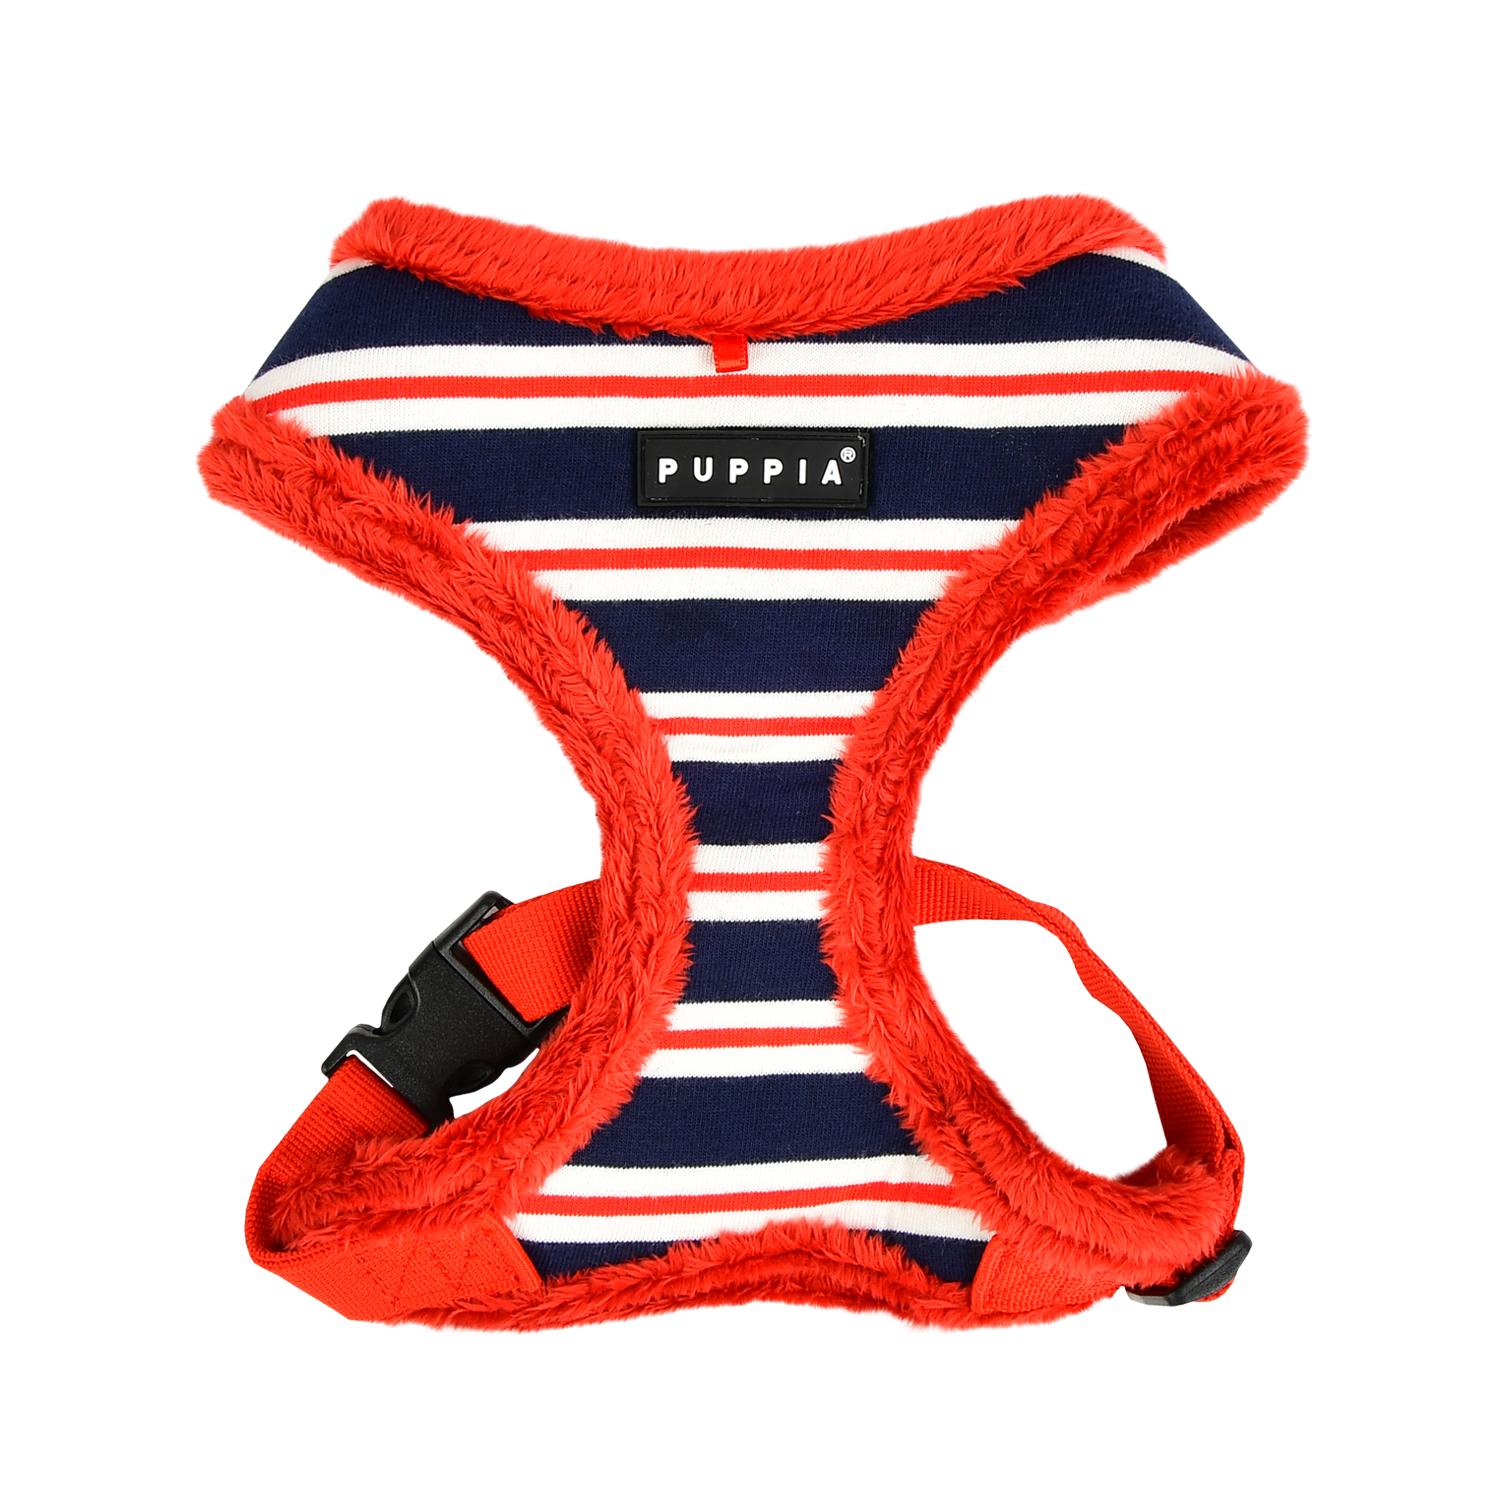 Rowdy Dog Harness by Puppia - Red